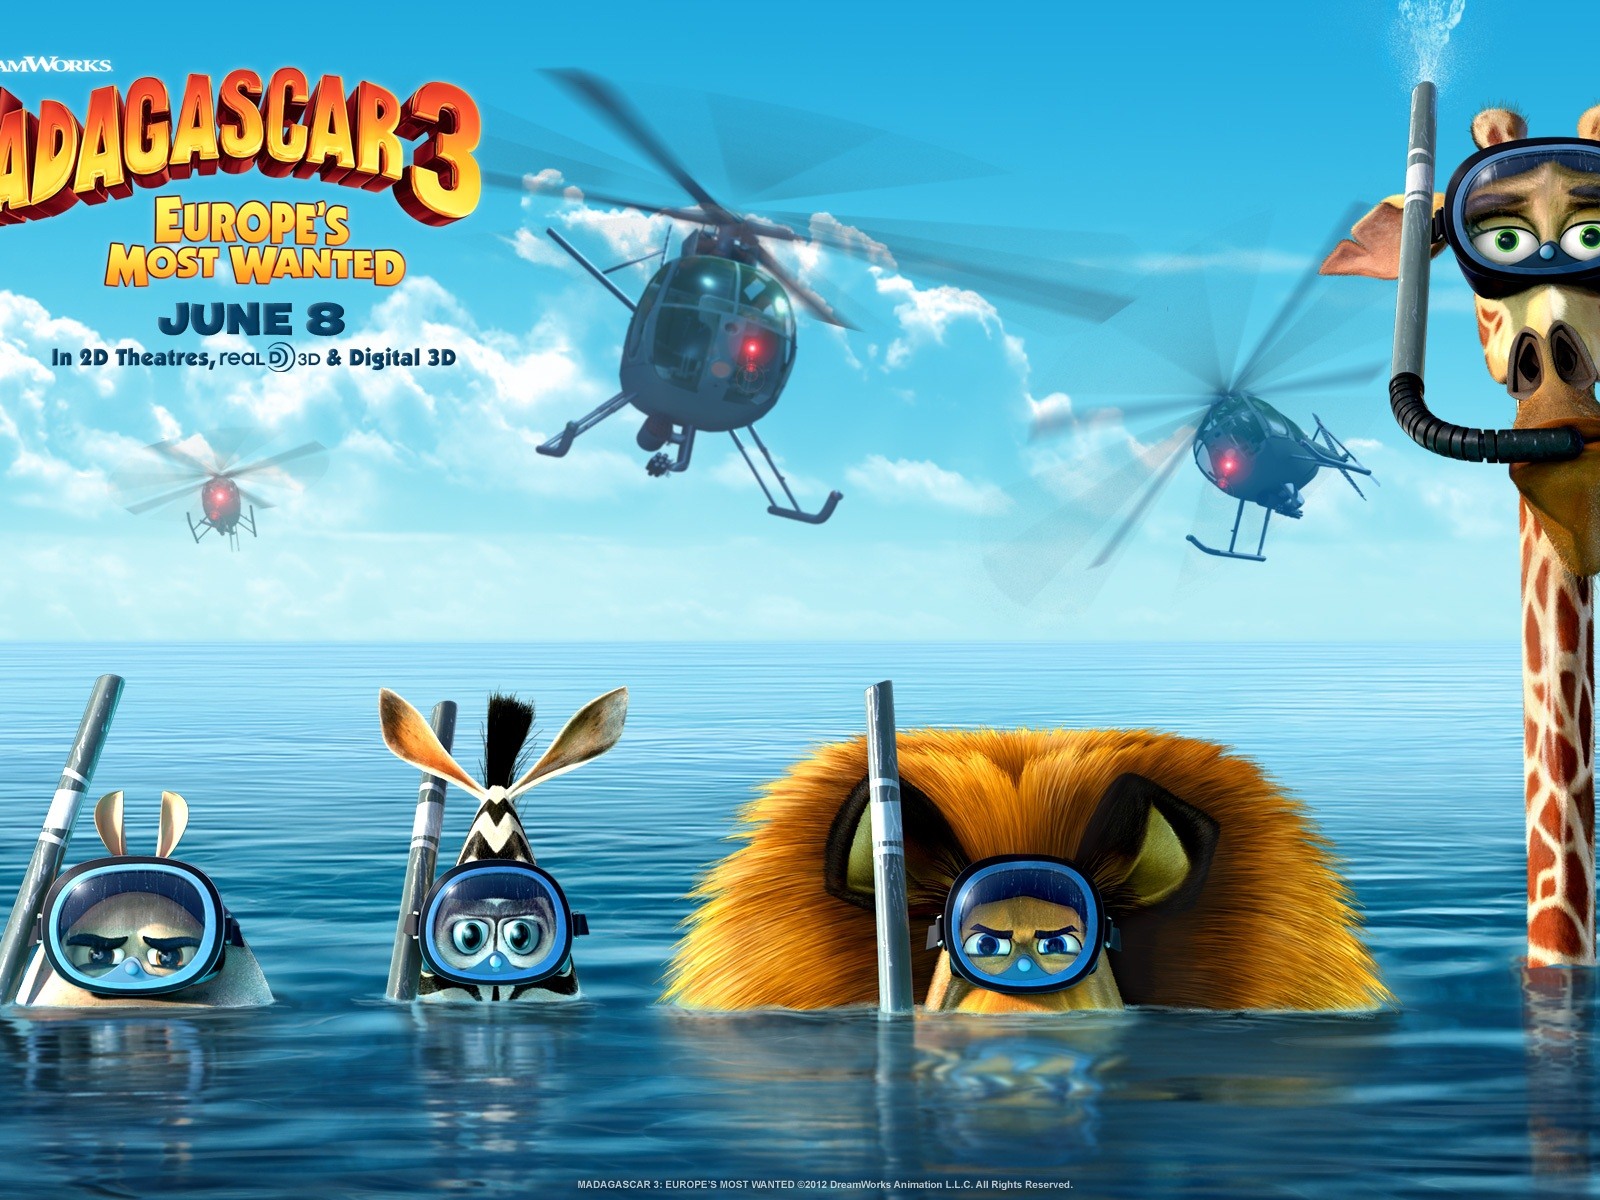 Madagascar 3: Europe's Most Wanted HD wallpapers #10 - 1600x1200